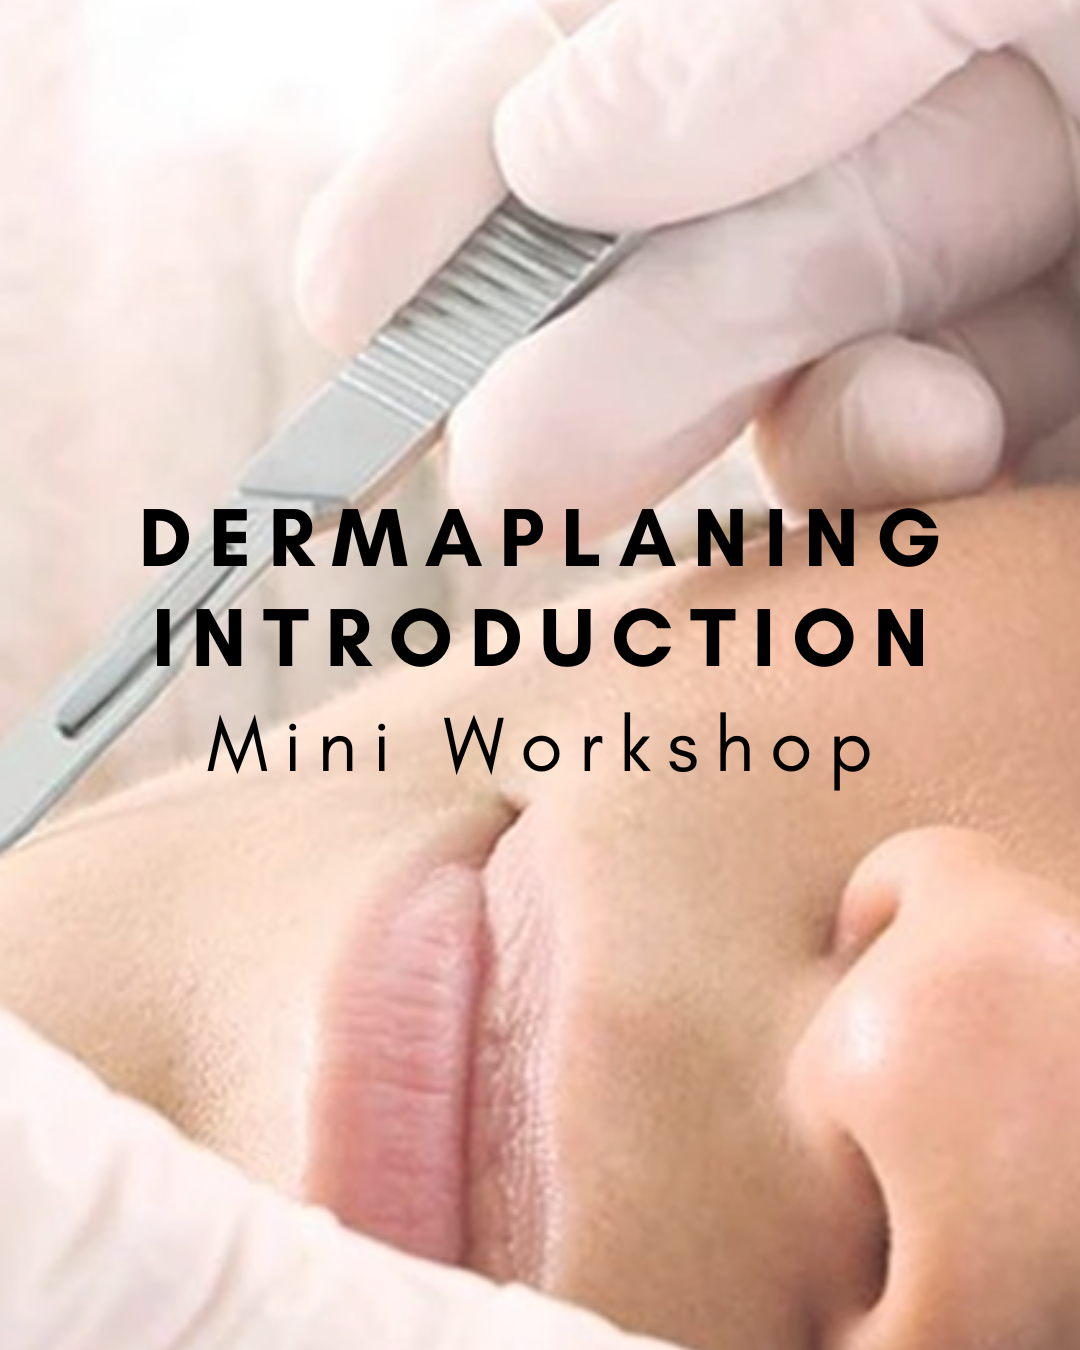 Introduction to Dermaplaning Mini Workshop